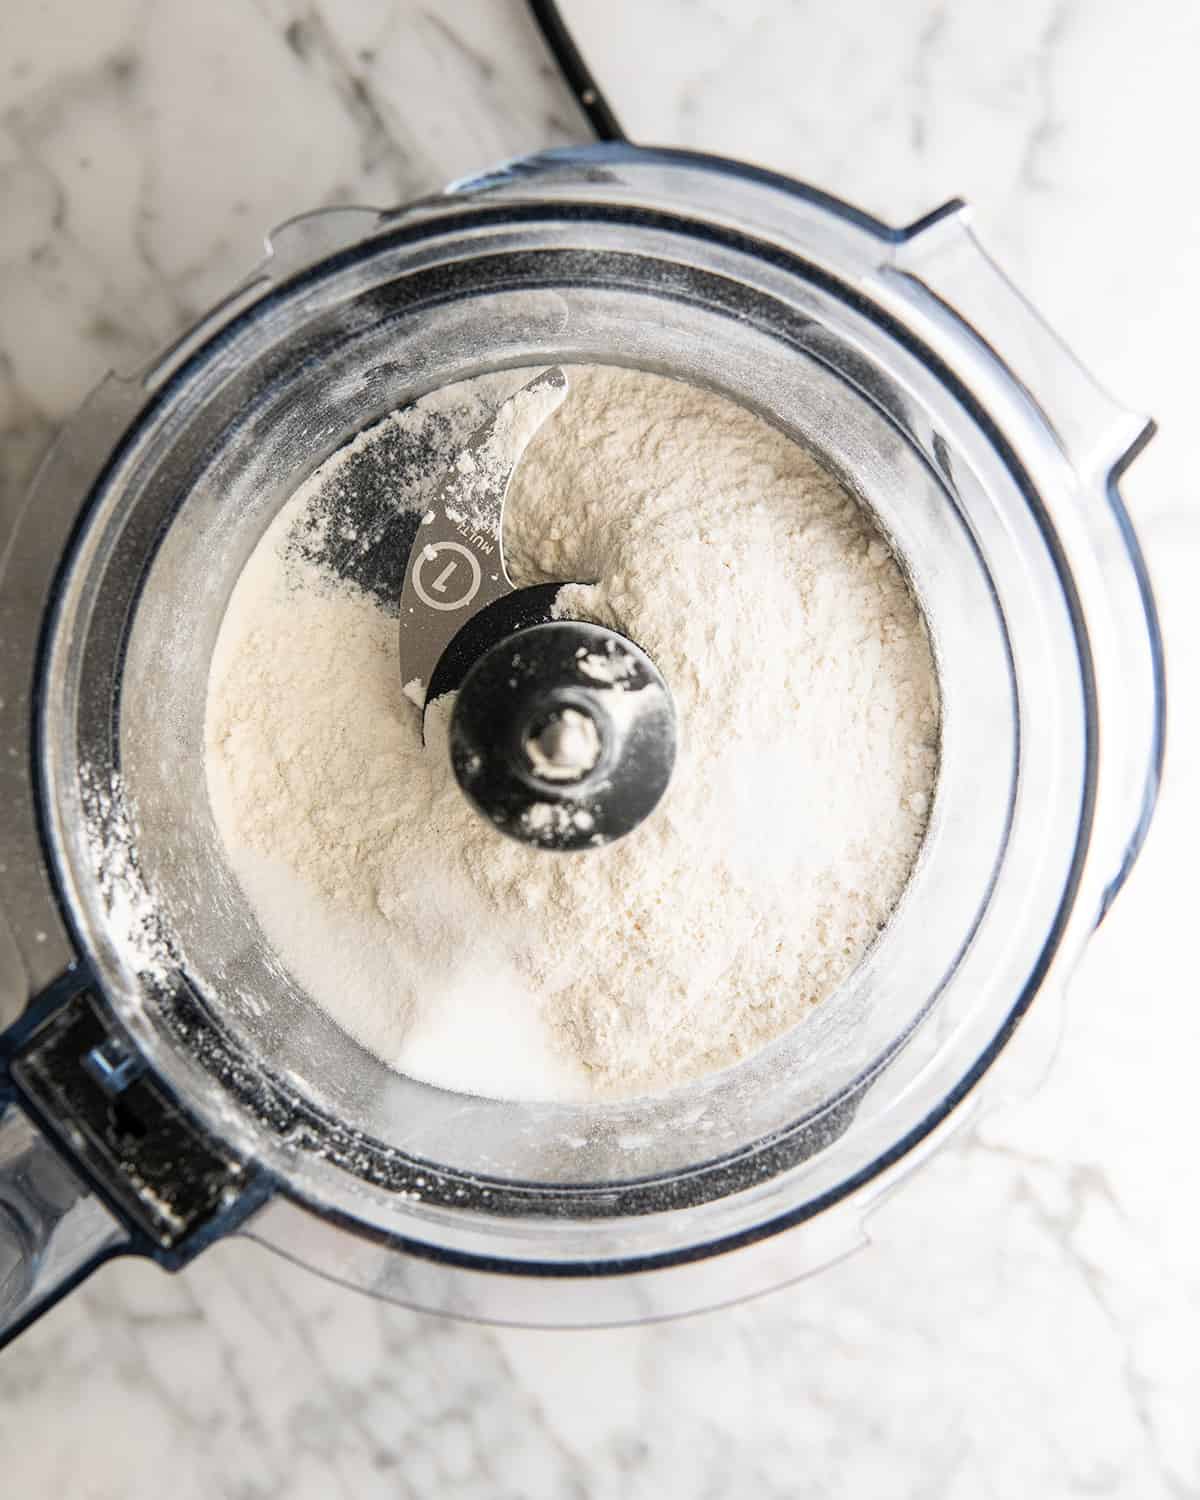 how to make galette dough - ingredients in food processor